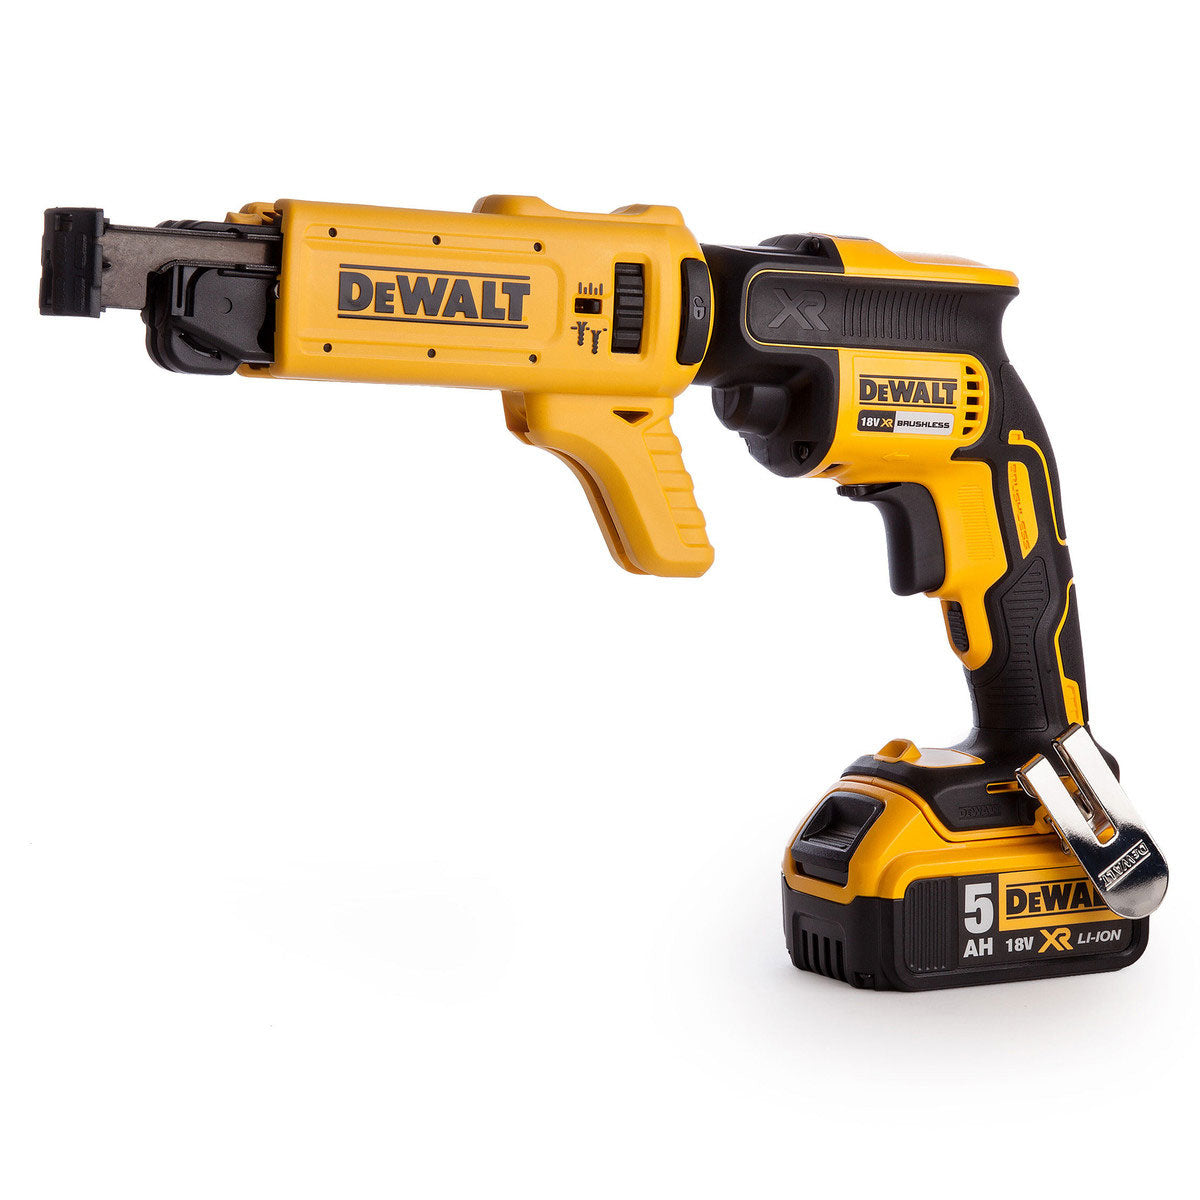 DeWalt DCF620P2K 18V XR Brushless Collated Drywall Screwdriver with 2 x 5.0Ah Batteries Charger & Case